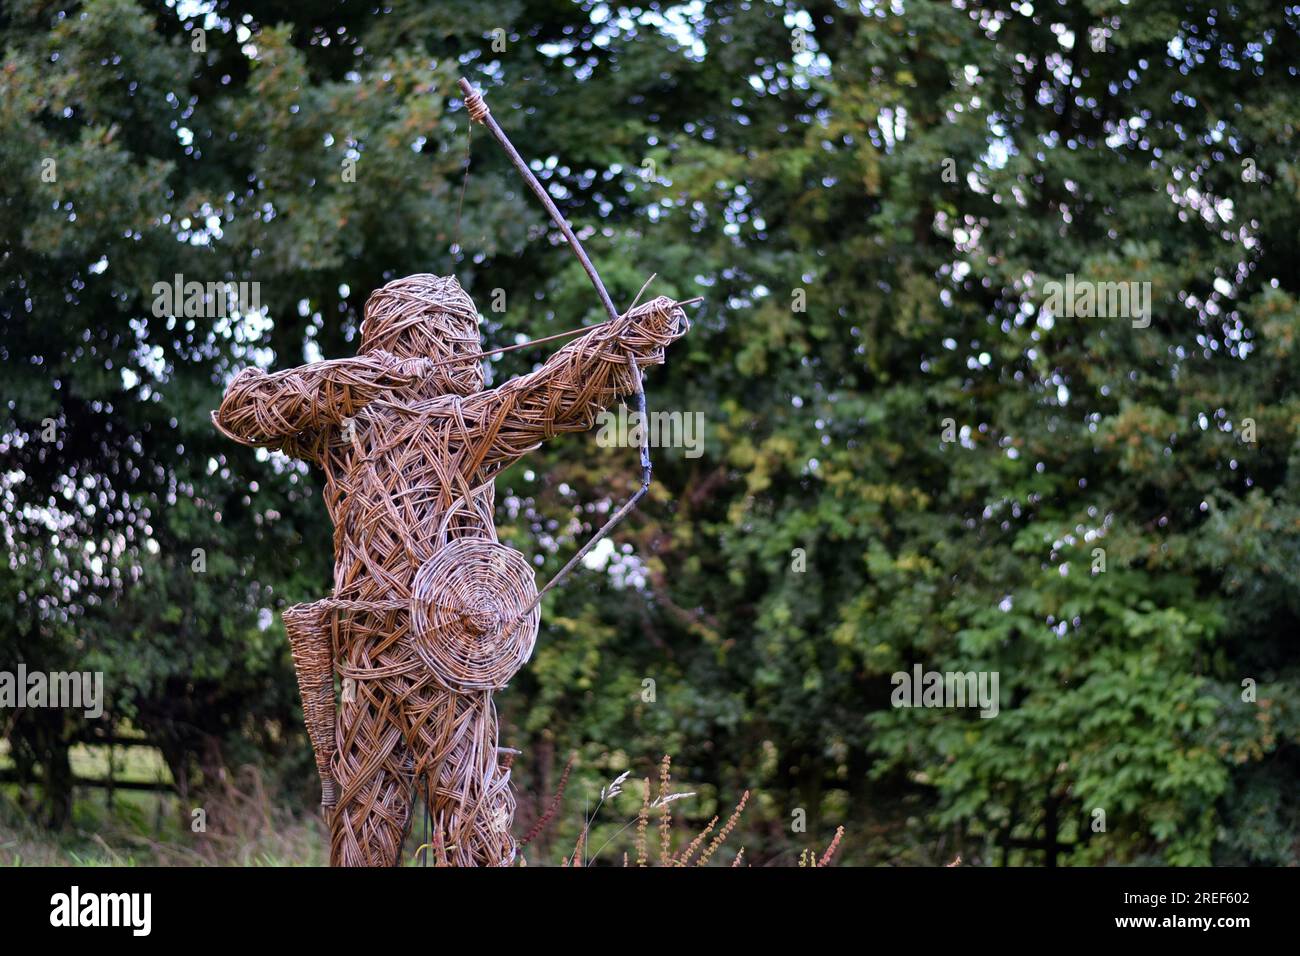 A large wooden archer sculpture with a bow and arrow on a background of green trees in the north of England. Stock Photo